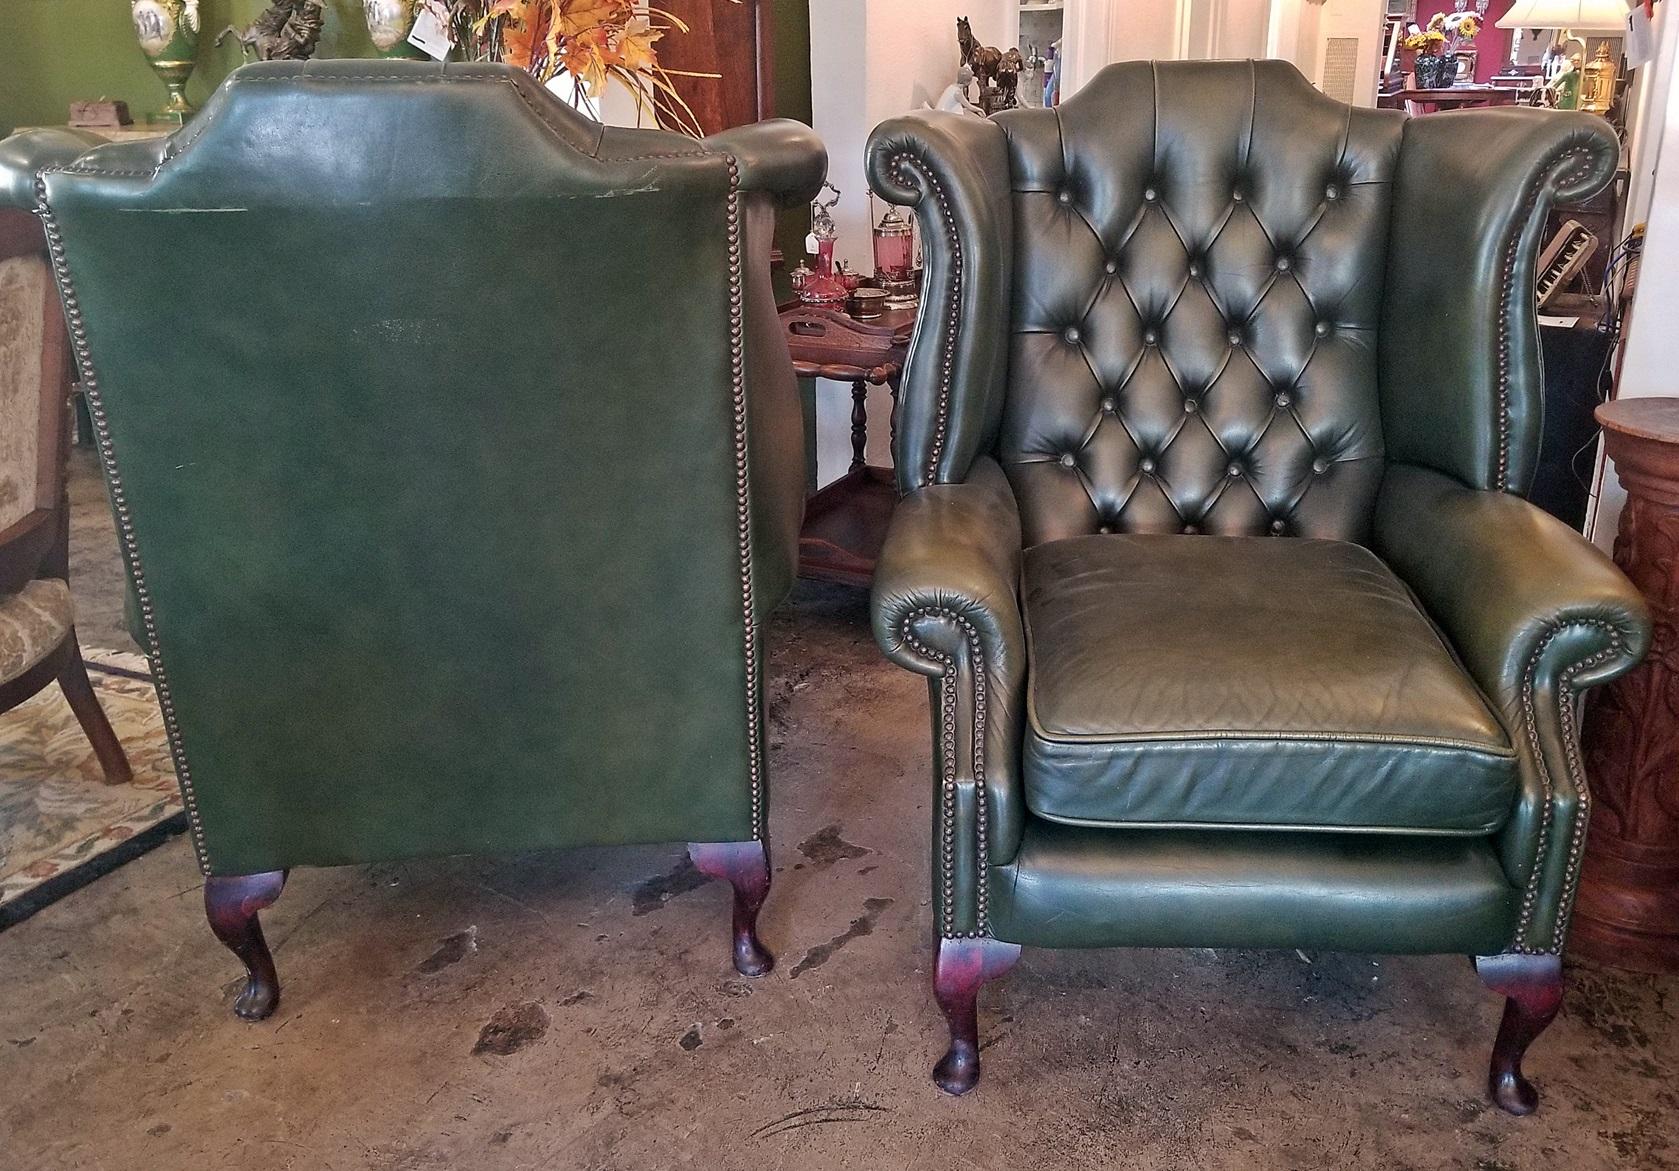 Presenting a lovely pair of mid-late 20th century reproduction armchairs.

These are a matching pair of green leather, Chesterfield Queen Ann style wing back armchairs.

Each sits on 4 mahogany footed legs in the Queen Anne Style with the button